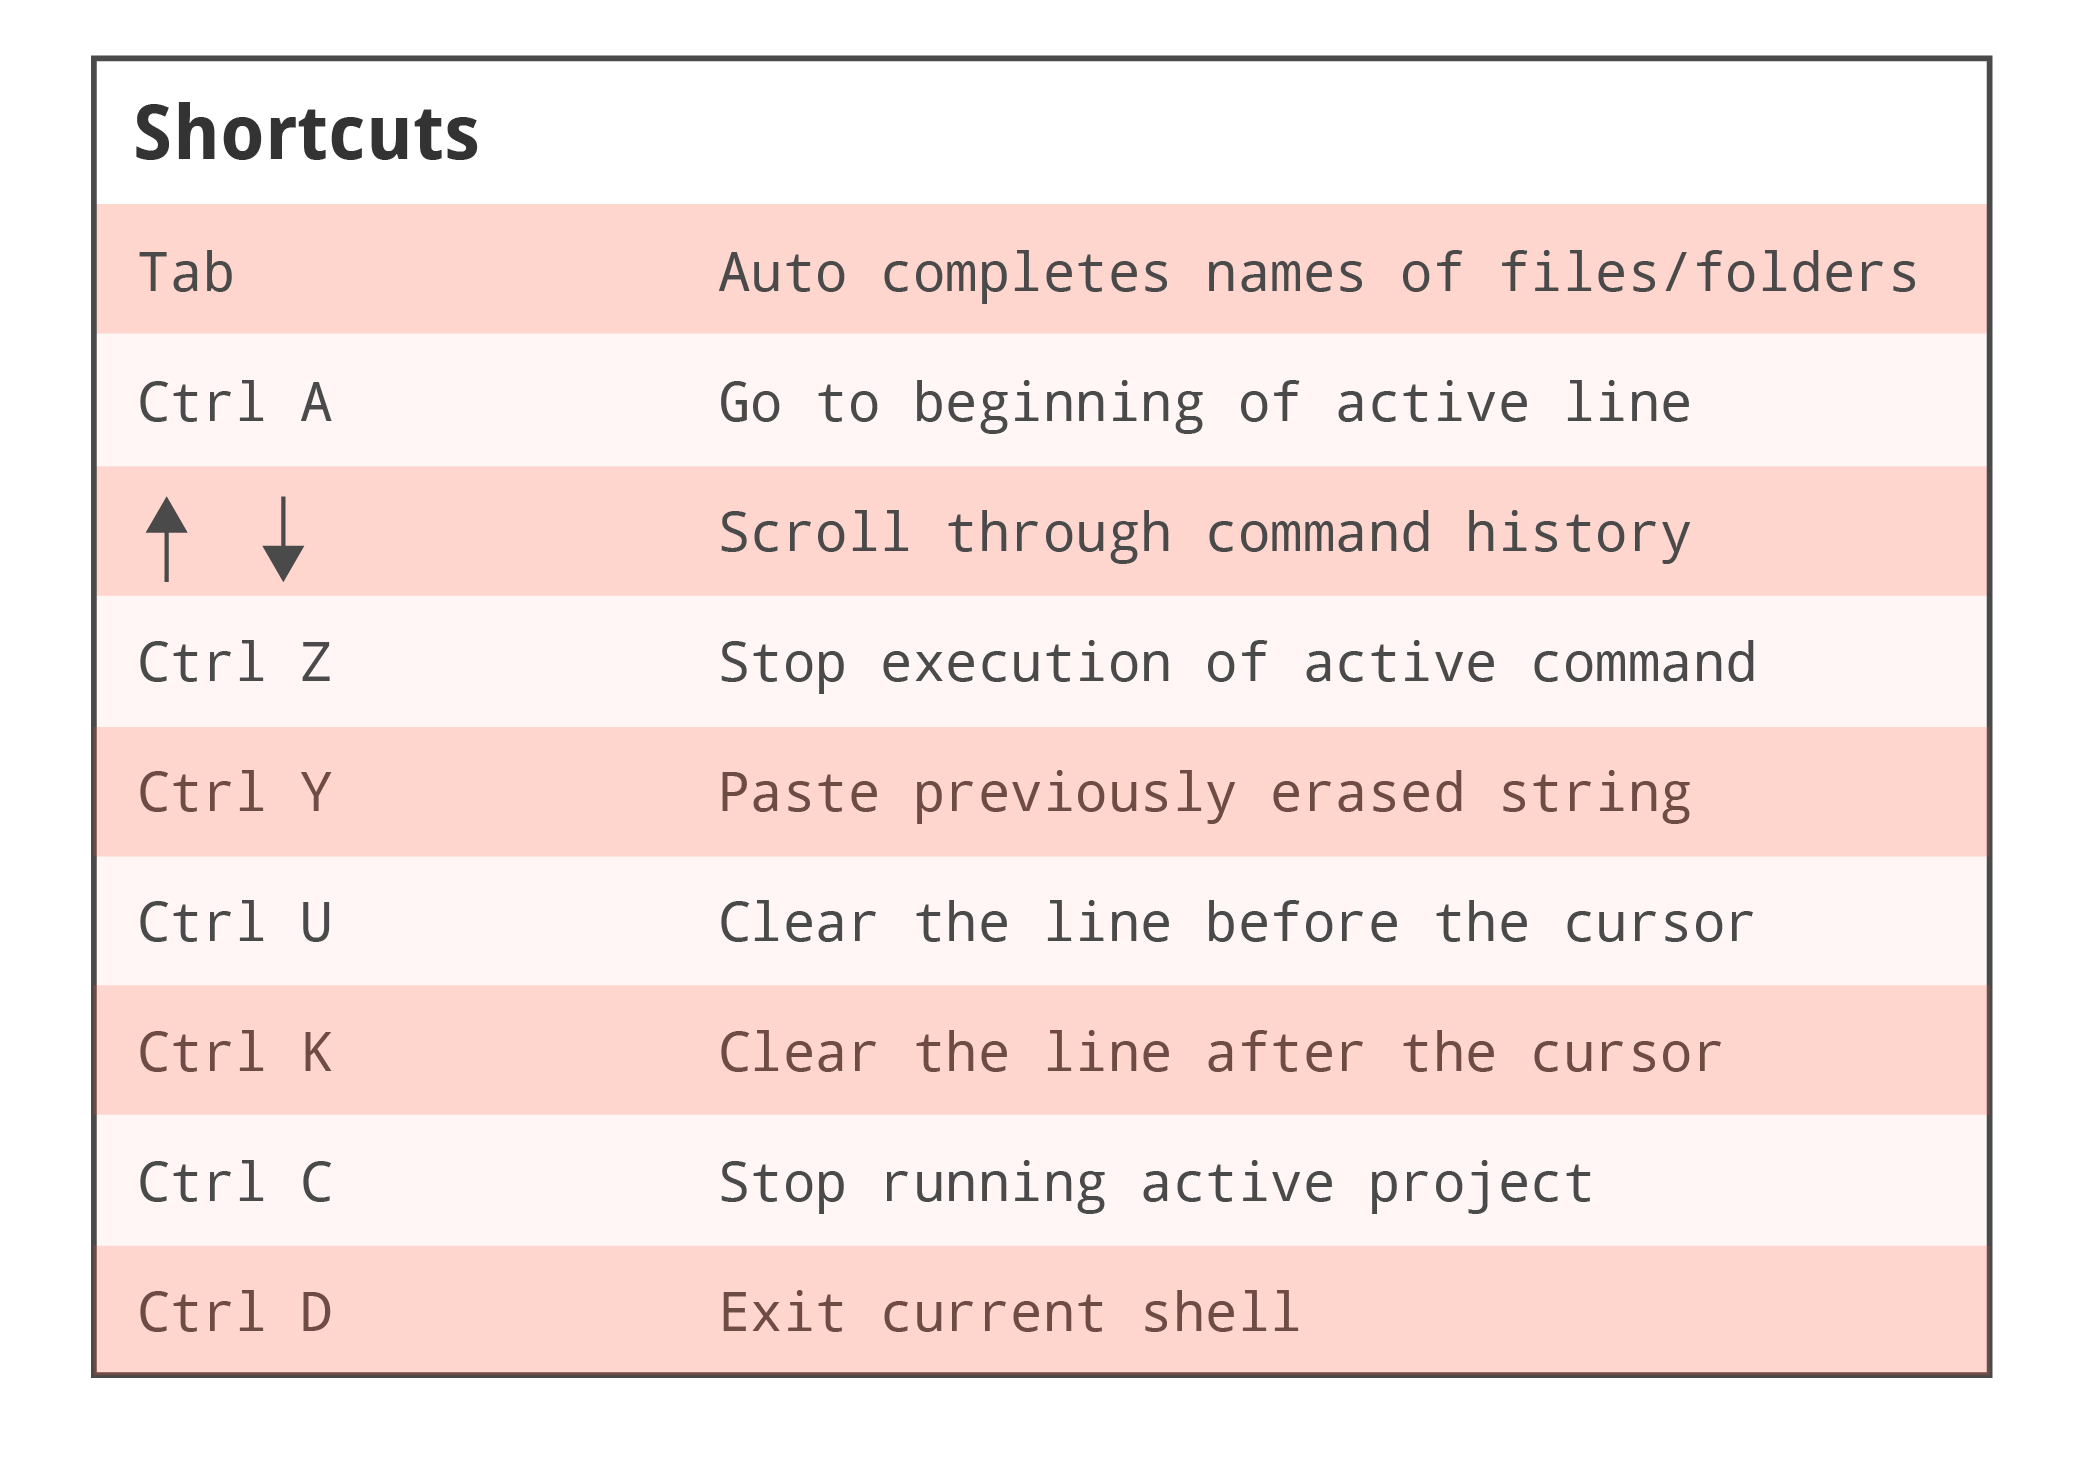 List of common Mac OS X command line shortcuts